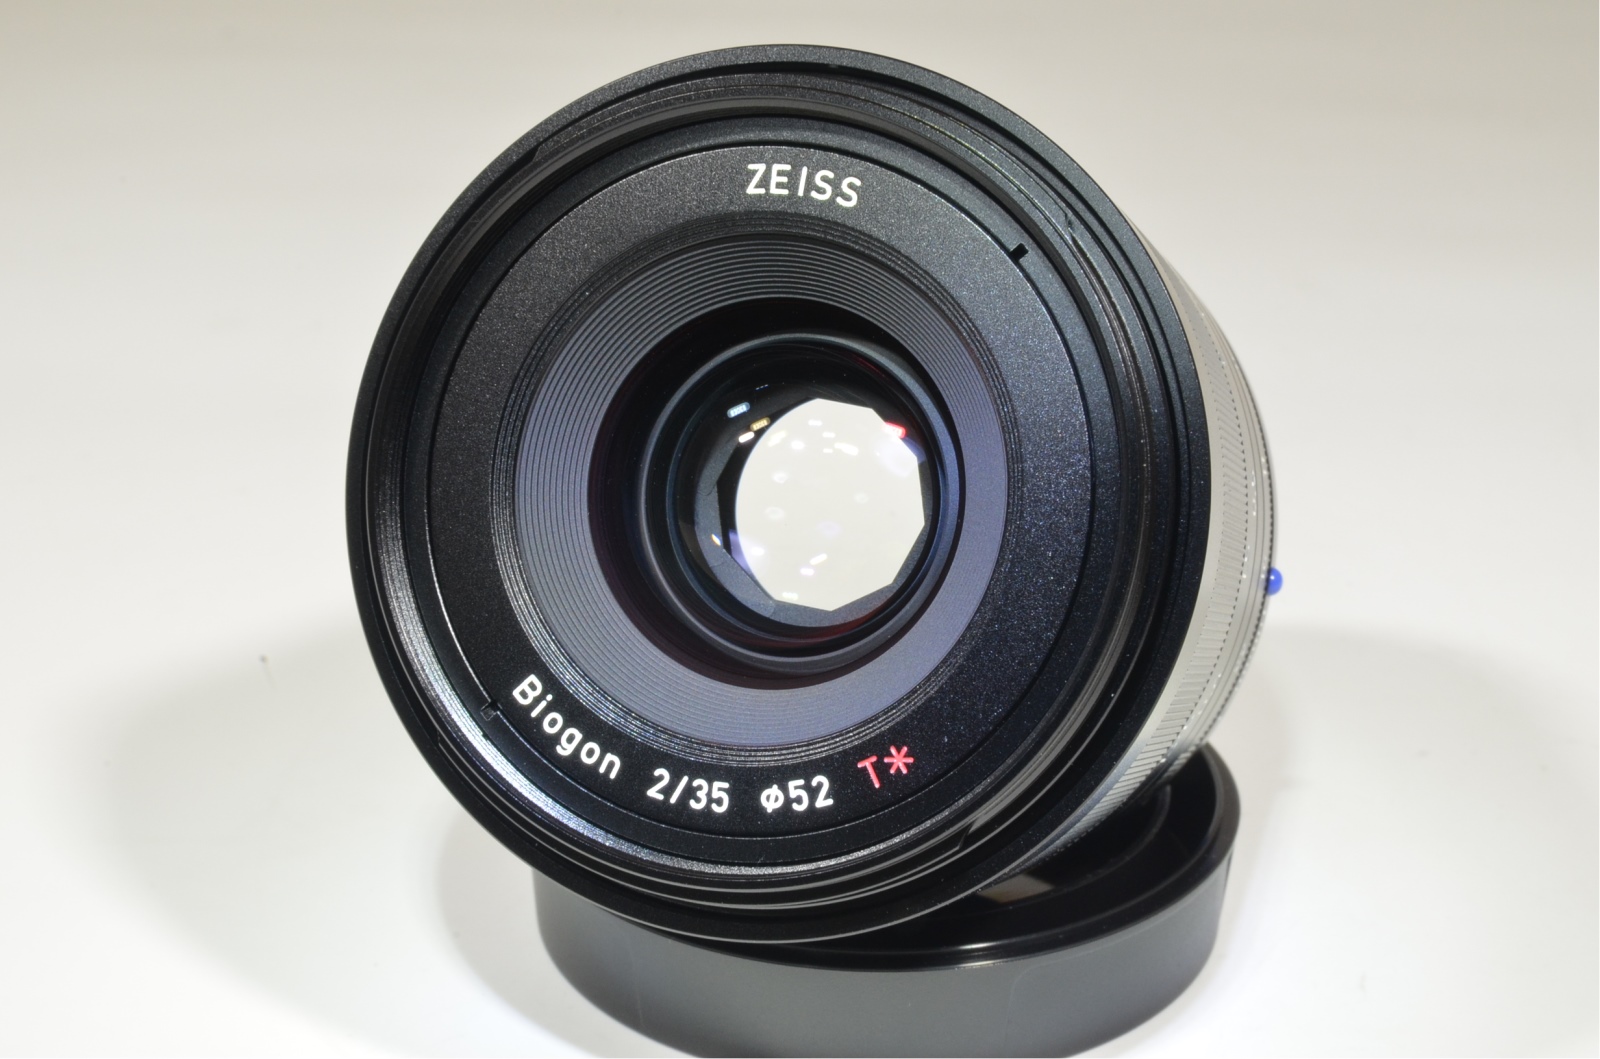 Carl Zeiss Loxia 35mm f/2 Biogon T* Lens for Sony E Mount #a0124